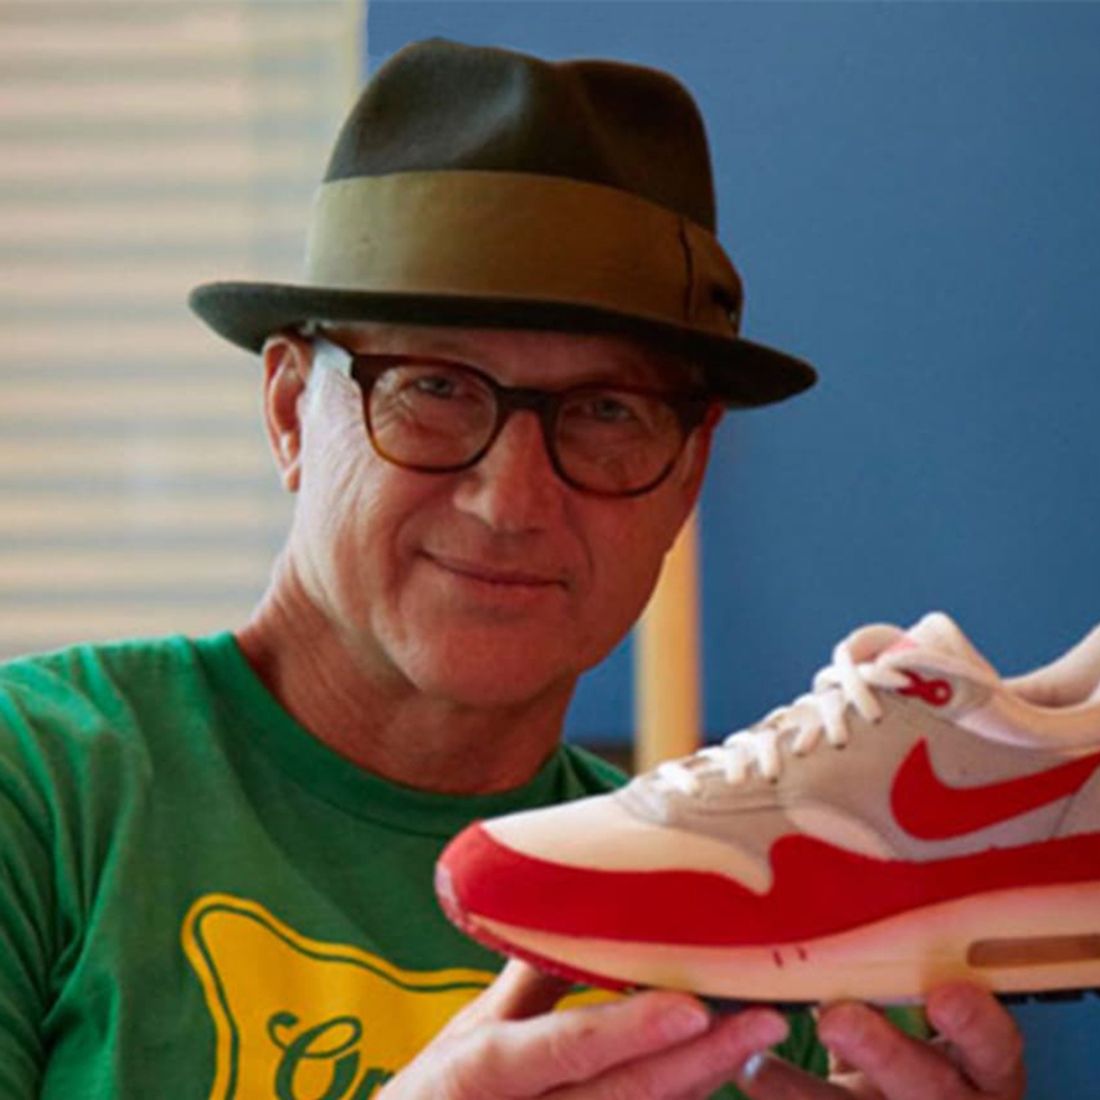 Five of Tinker Hatfield's Best Ideas and Where Came From - Sneaker Freaker